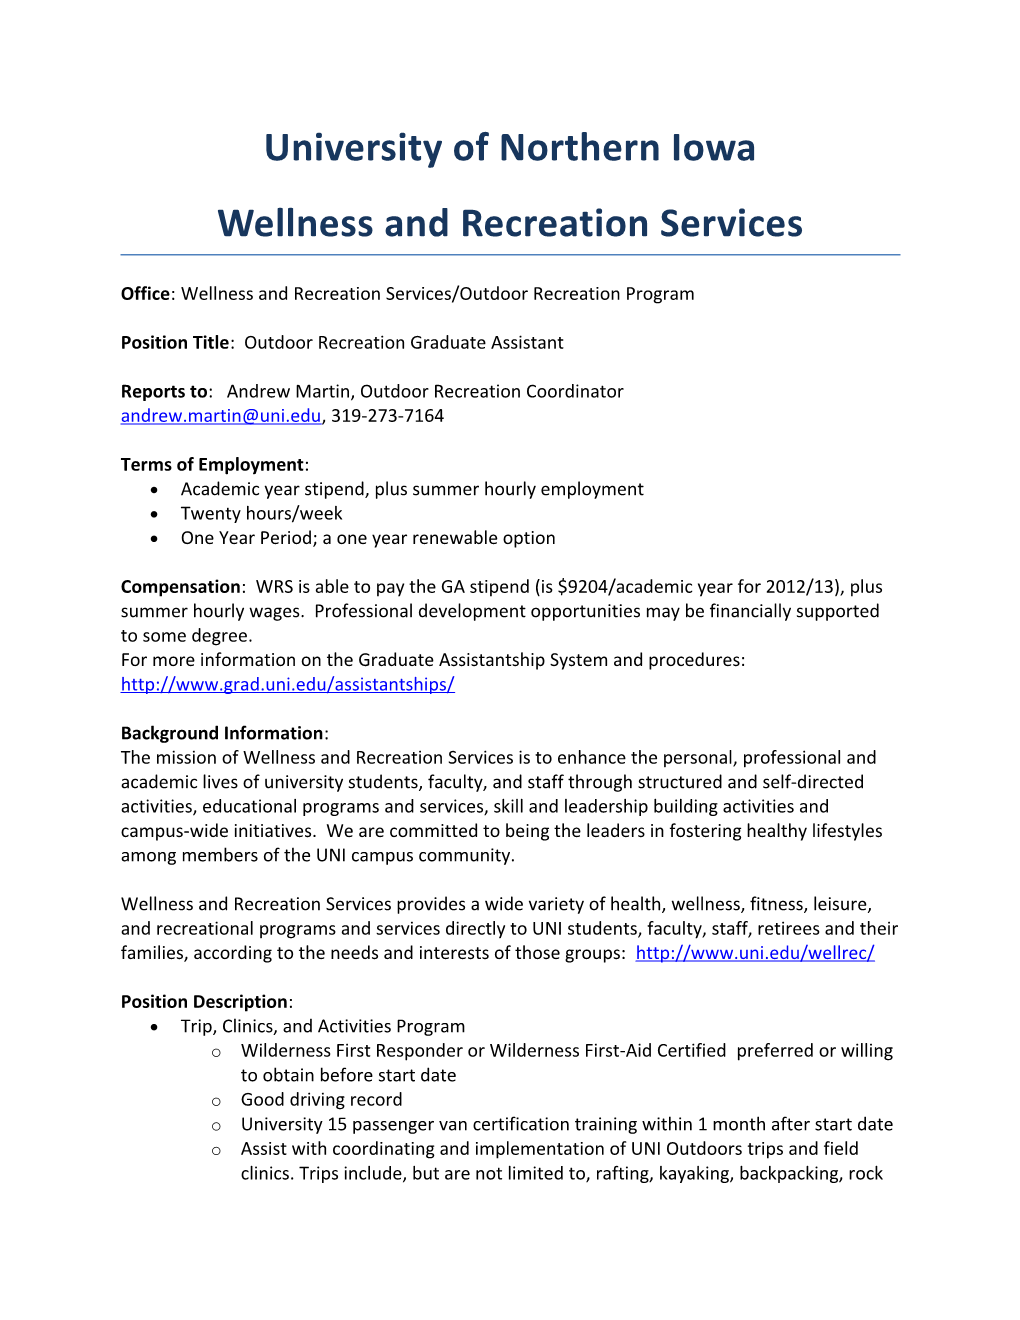 Wellness and Recreation Services